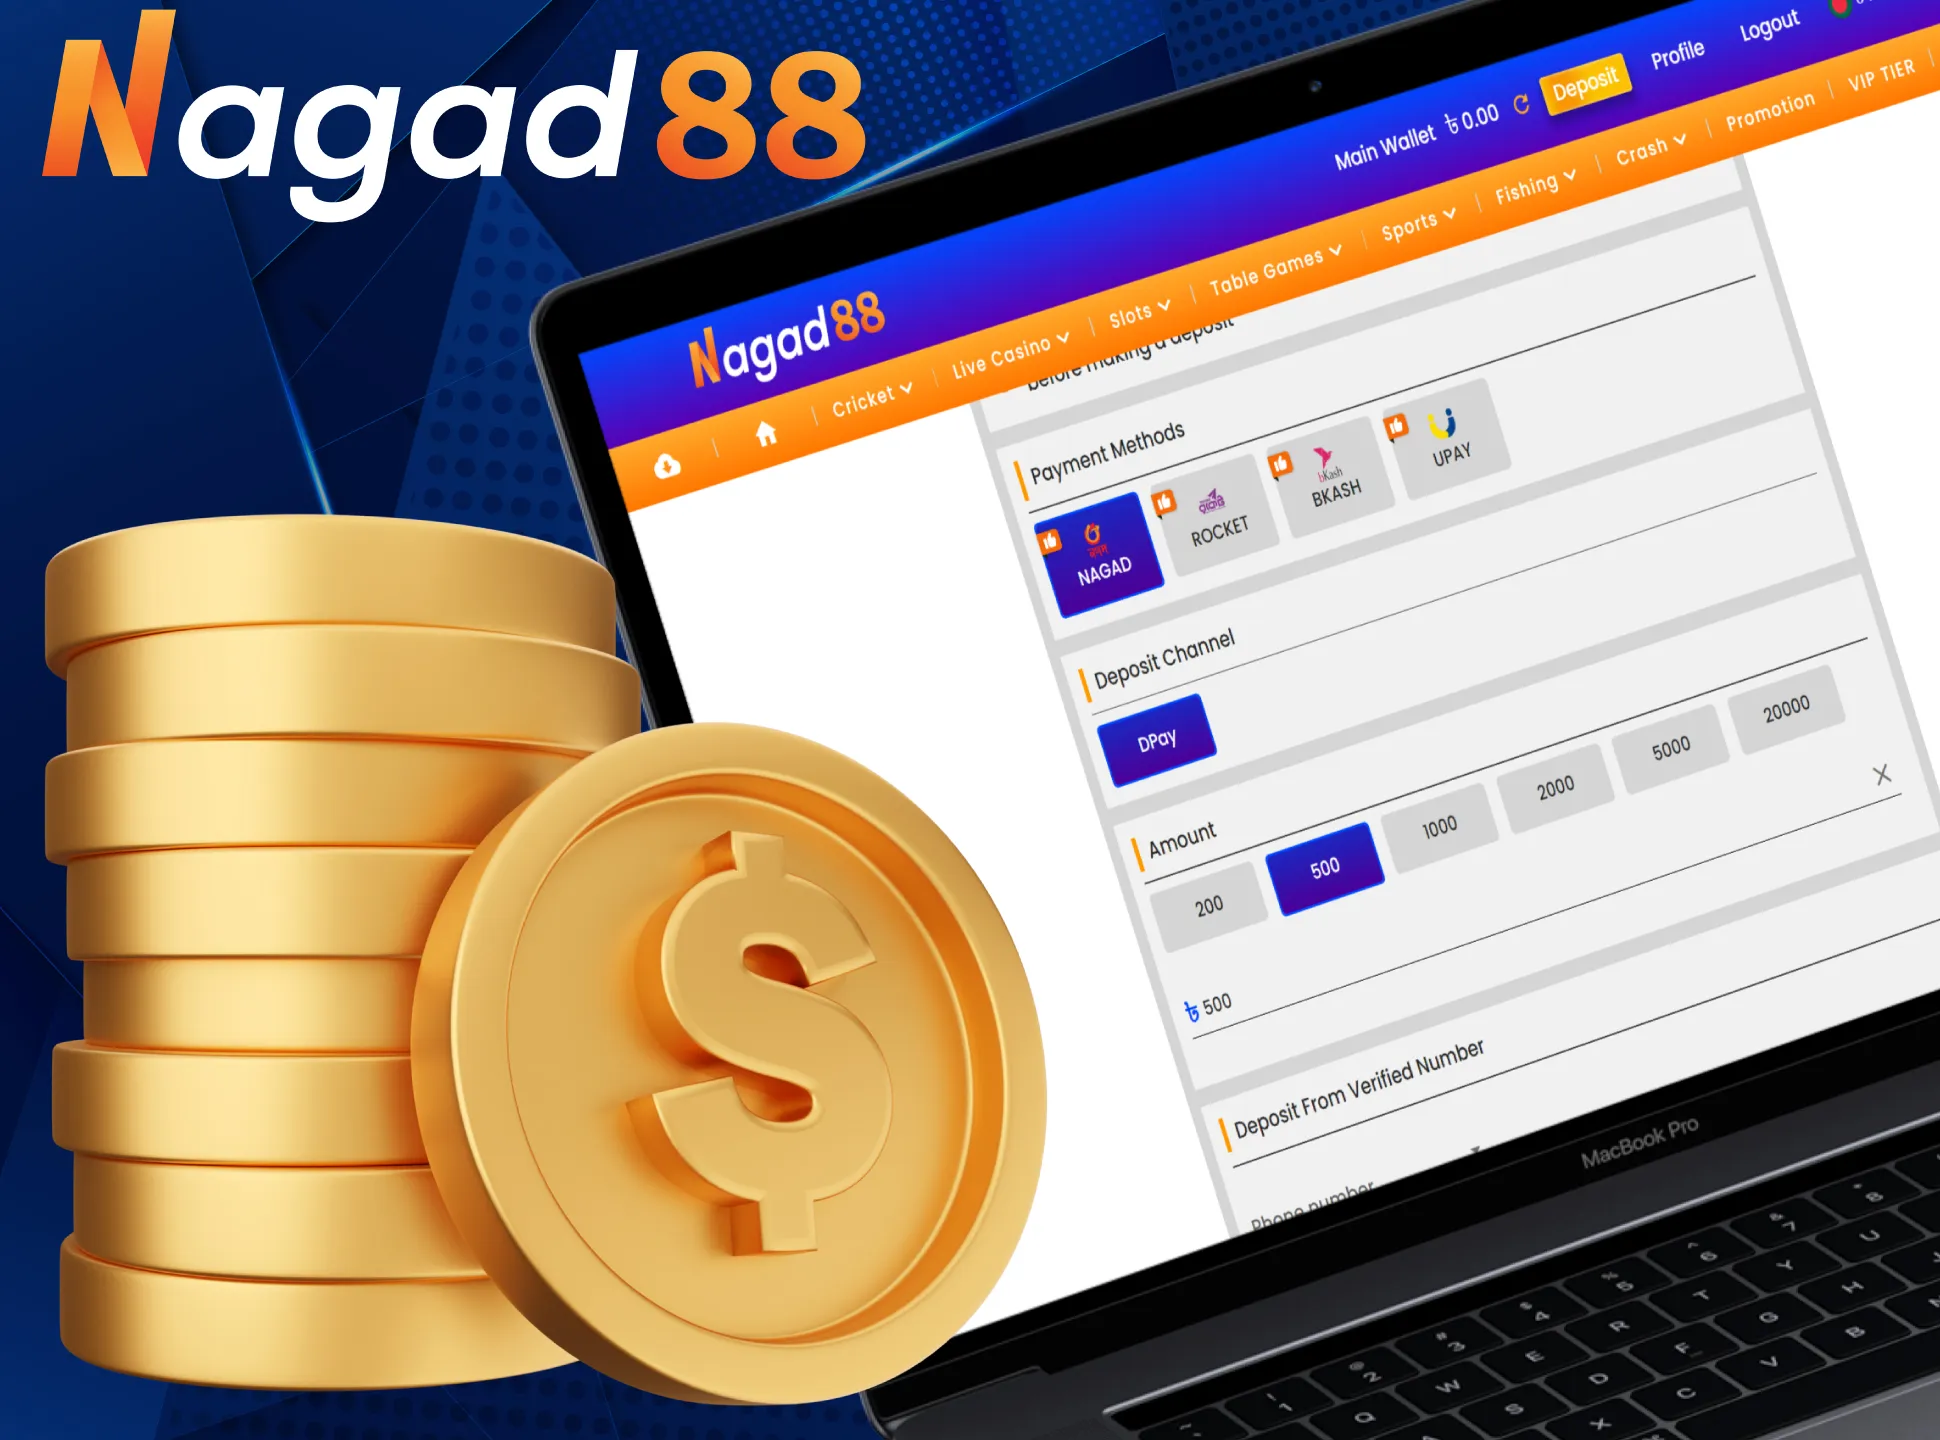 At Nagad88 it is easy and fast to make a deposit for betting and withdraw your winnings.